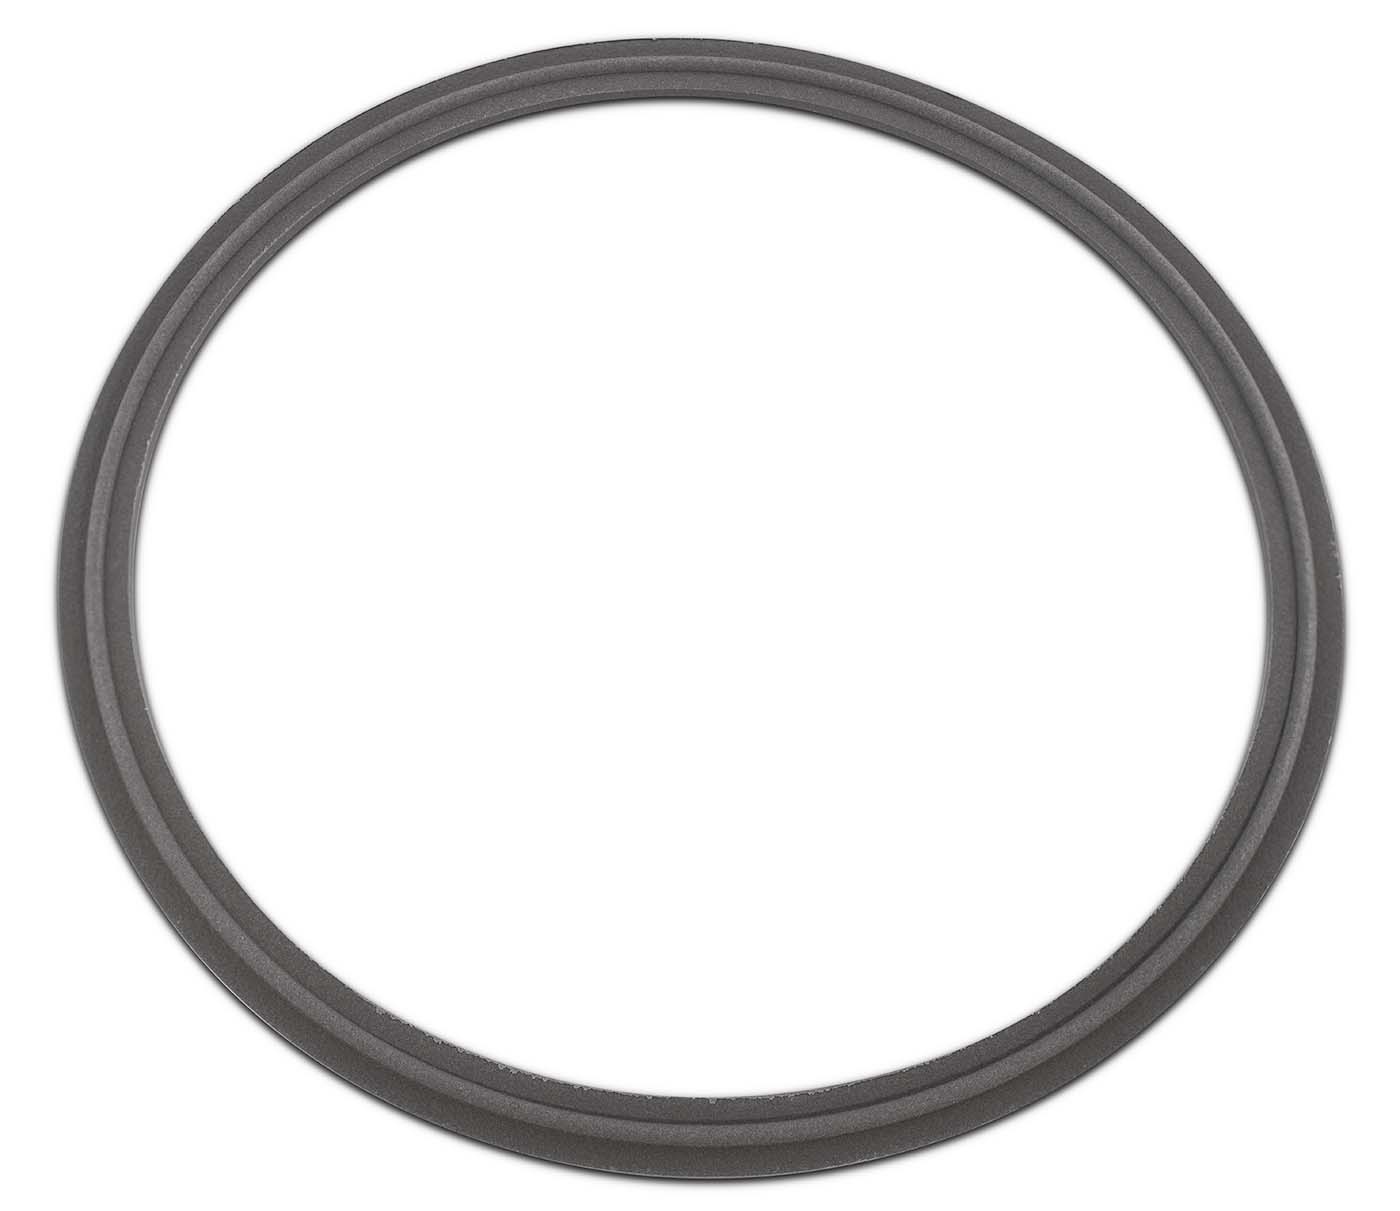 Tef-Steel PTFE / Stainless Steel Sanitary Tri-Clamp Gasket Shop All Categories BVV 6-inch